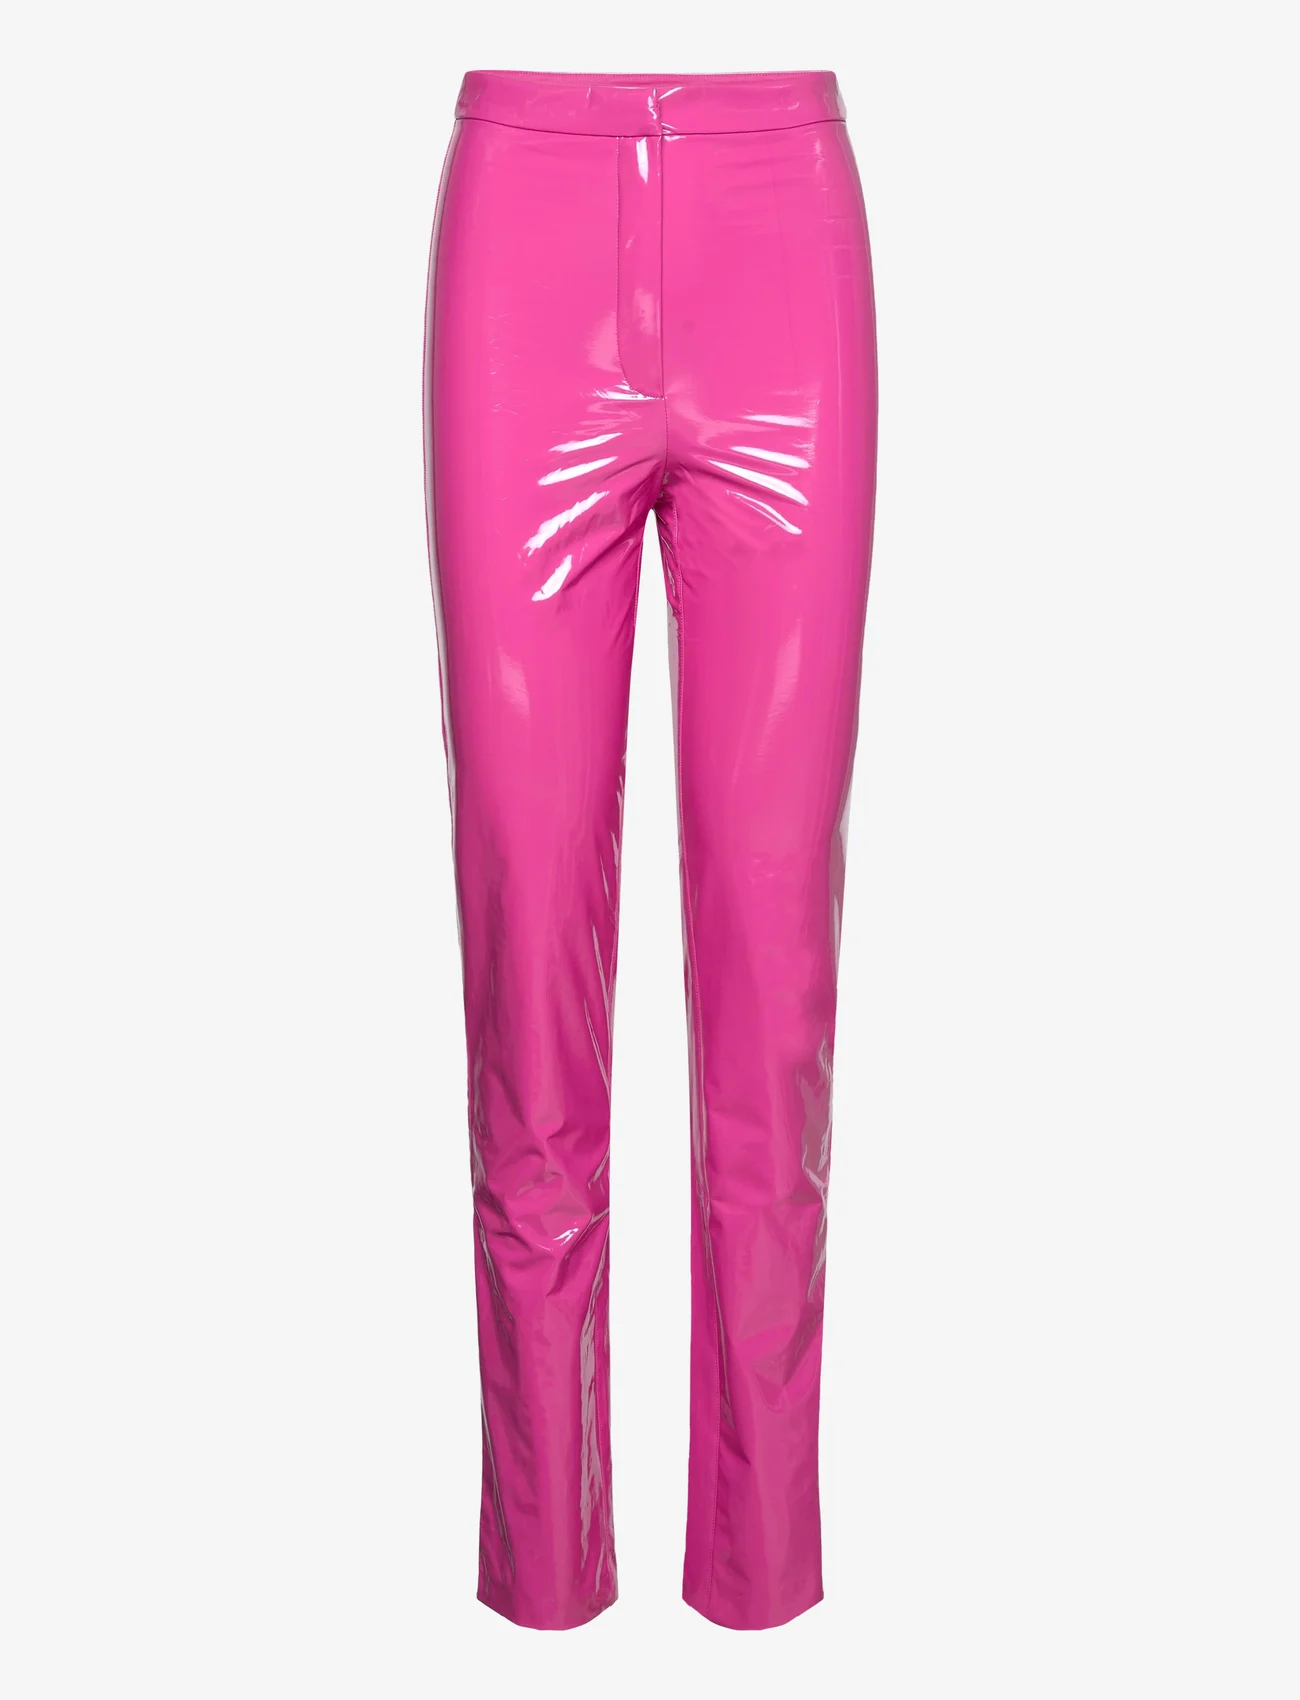 ROTATE Birger Christensen - Patent Coated Pants - peoriided outlet-hindadega - verry berry (pink) - 0